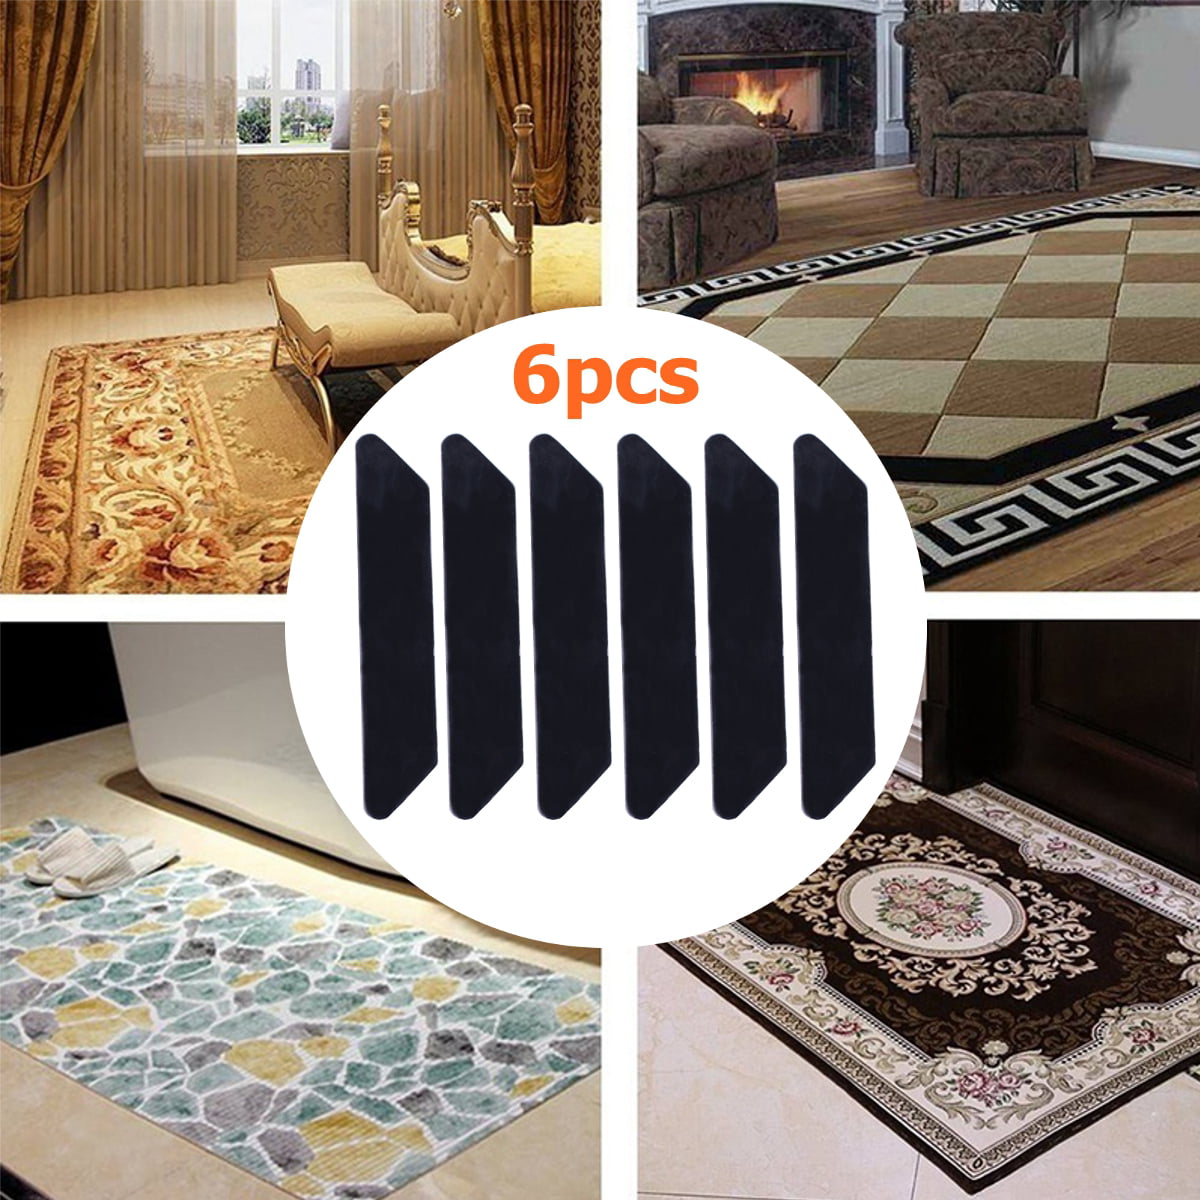 Rug Grippers Pad 6pcs Renewable, Stop Rugs Slipping On Wooden Floors